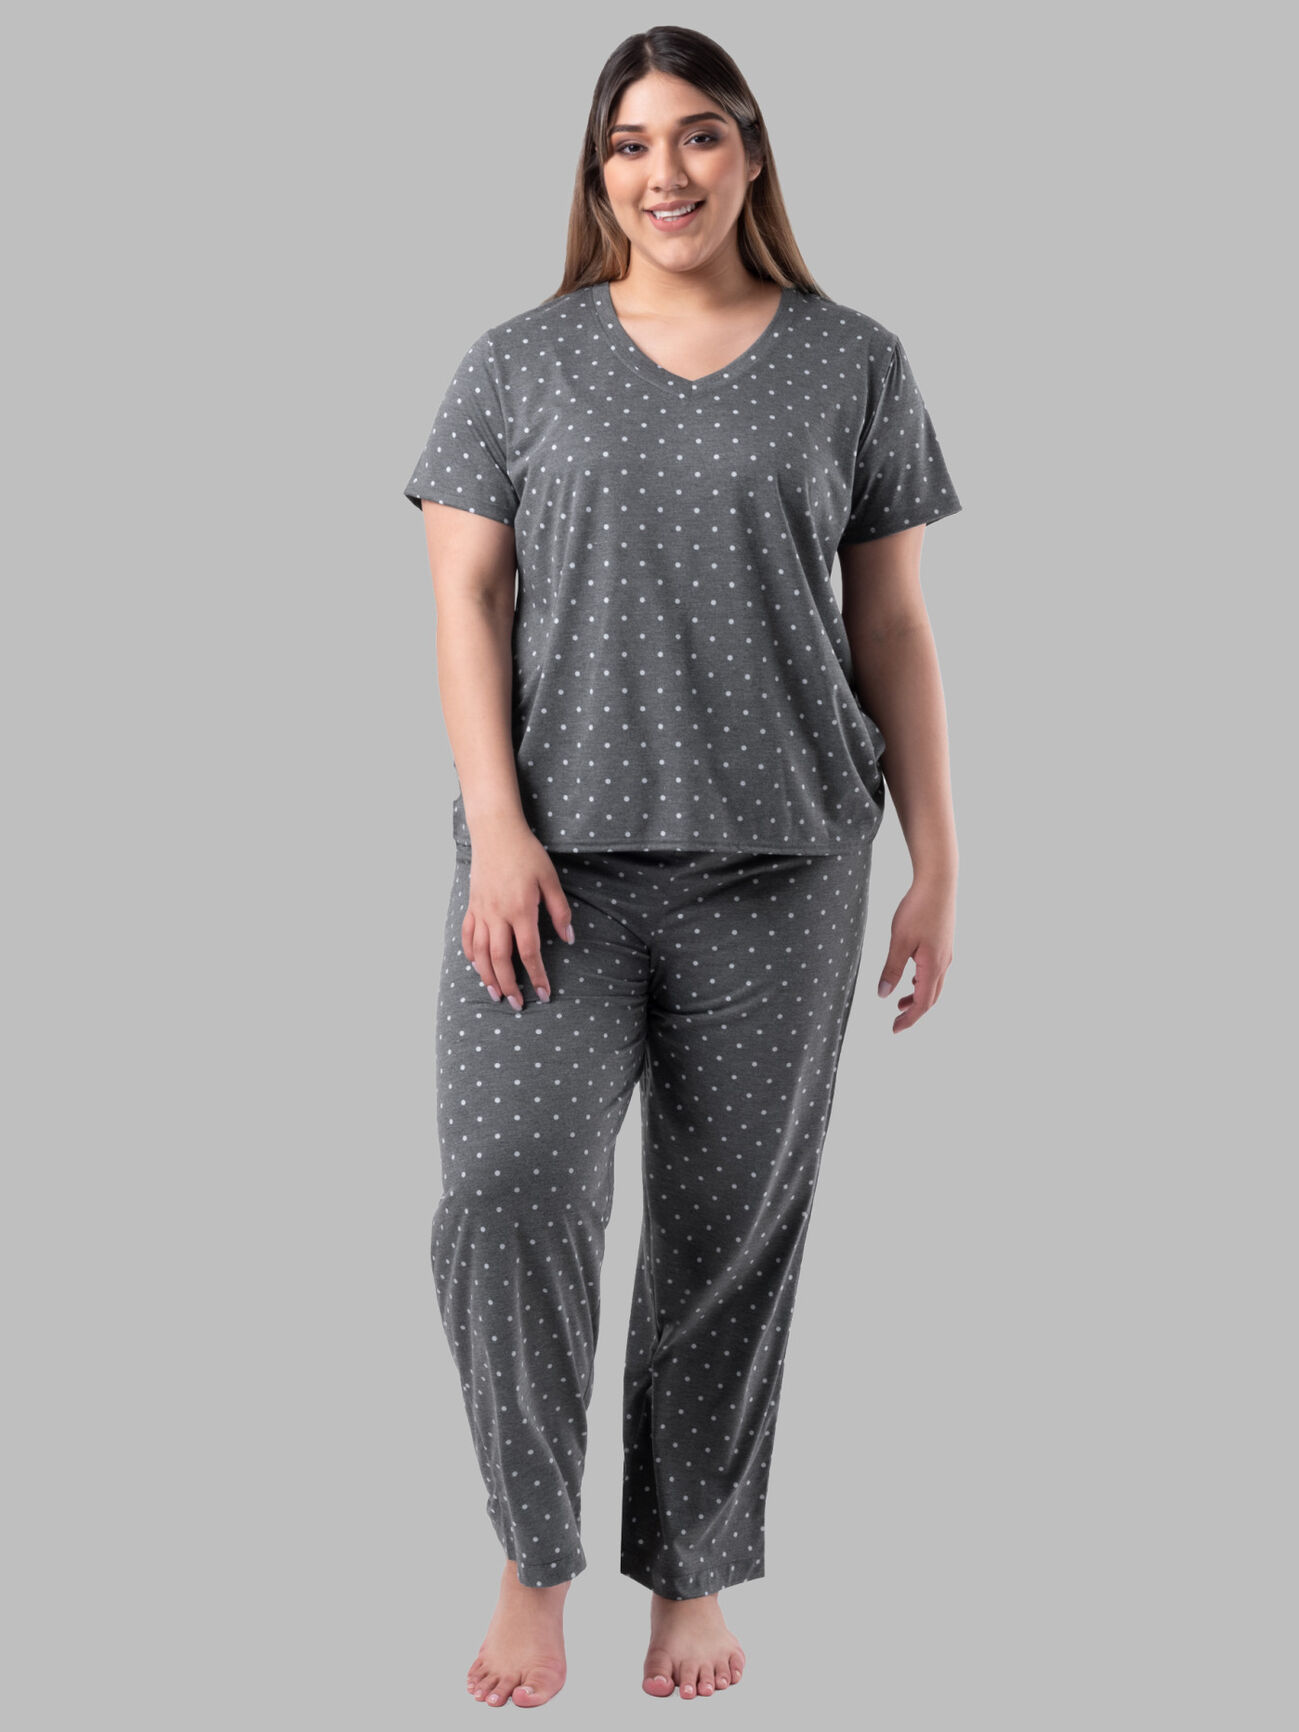 Fit for Me by Fruit of the Loom Women's Plus Size Breathable